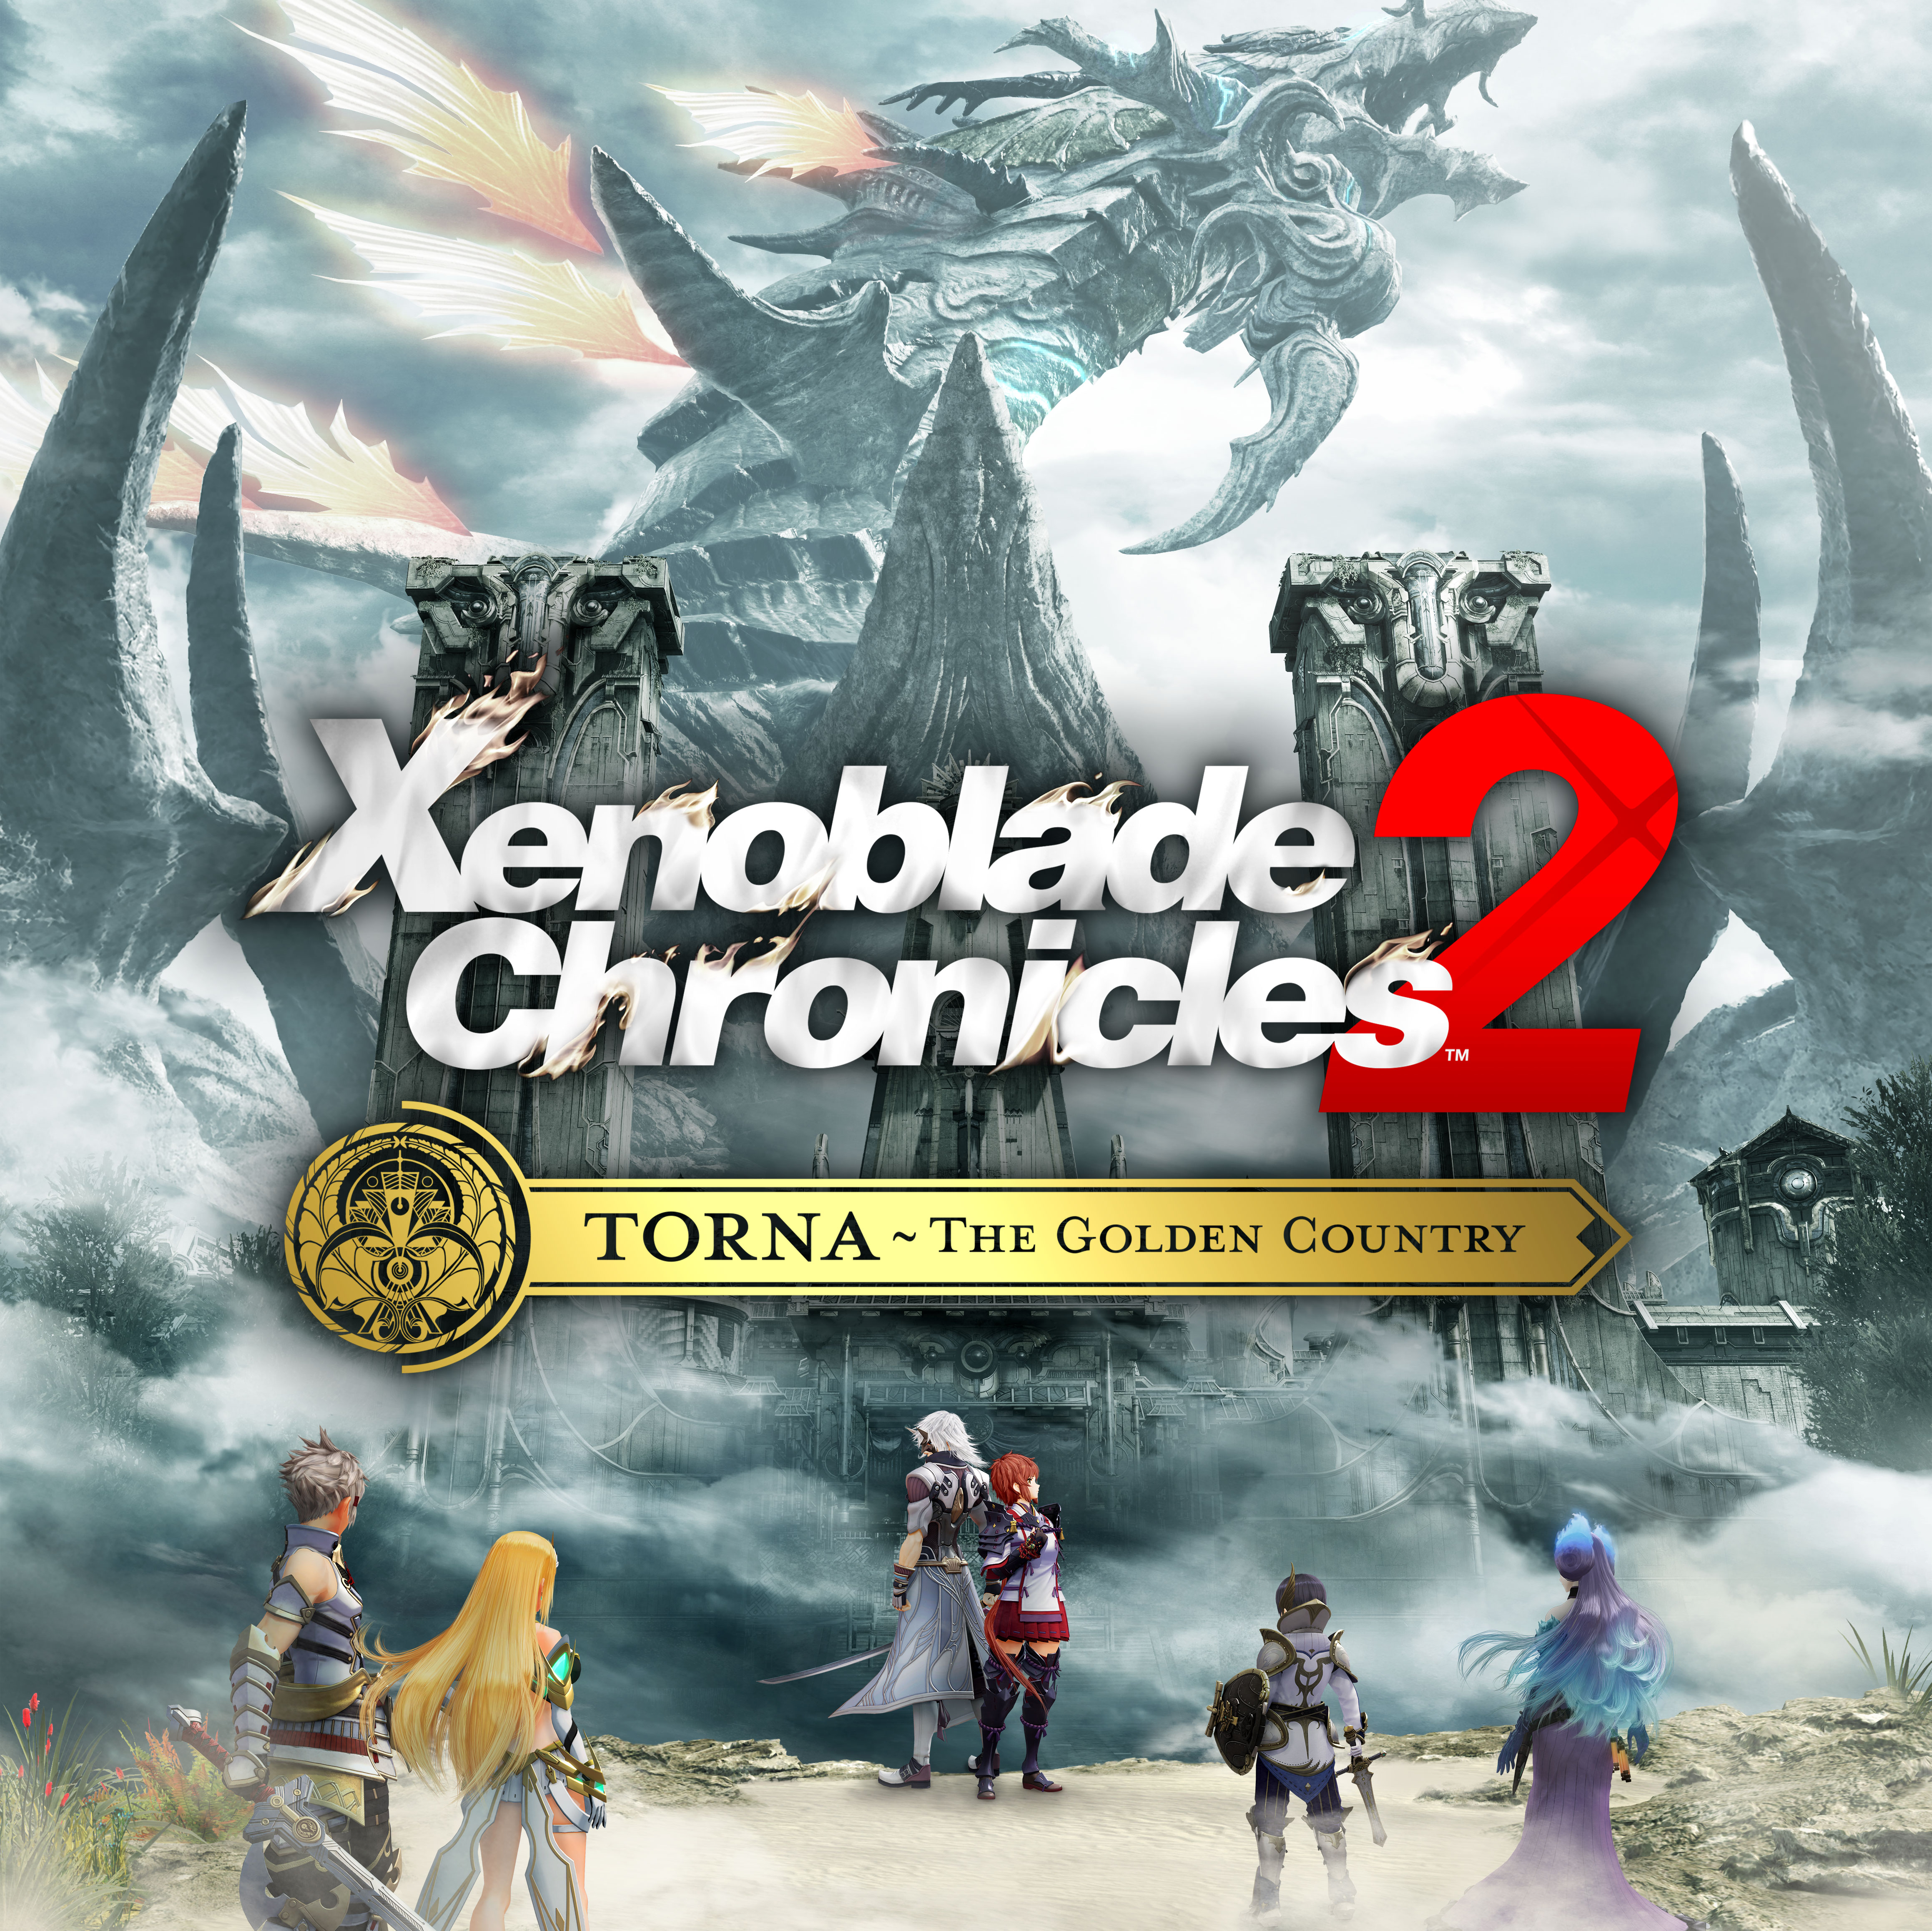 Monolith Soft's Tetsuya Takahashi reveals more on Xenoblade Chronicles 2: Torna - The Golden Country